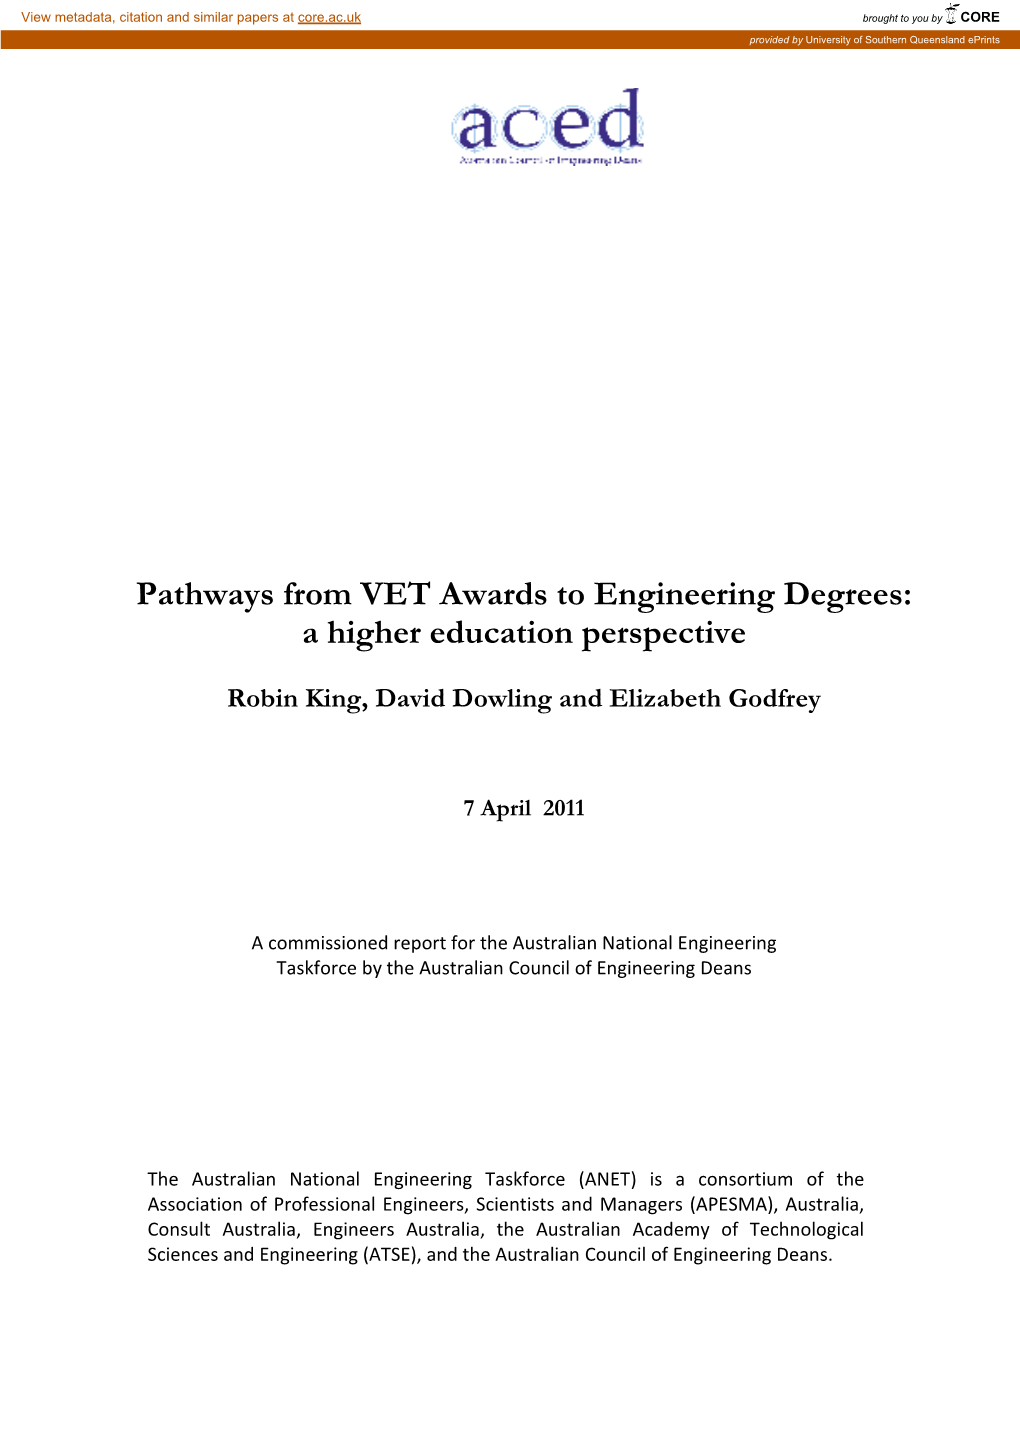 Pathways from VET Awards to Engineering Degrees